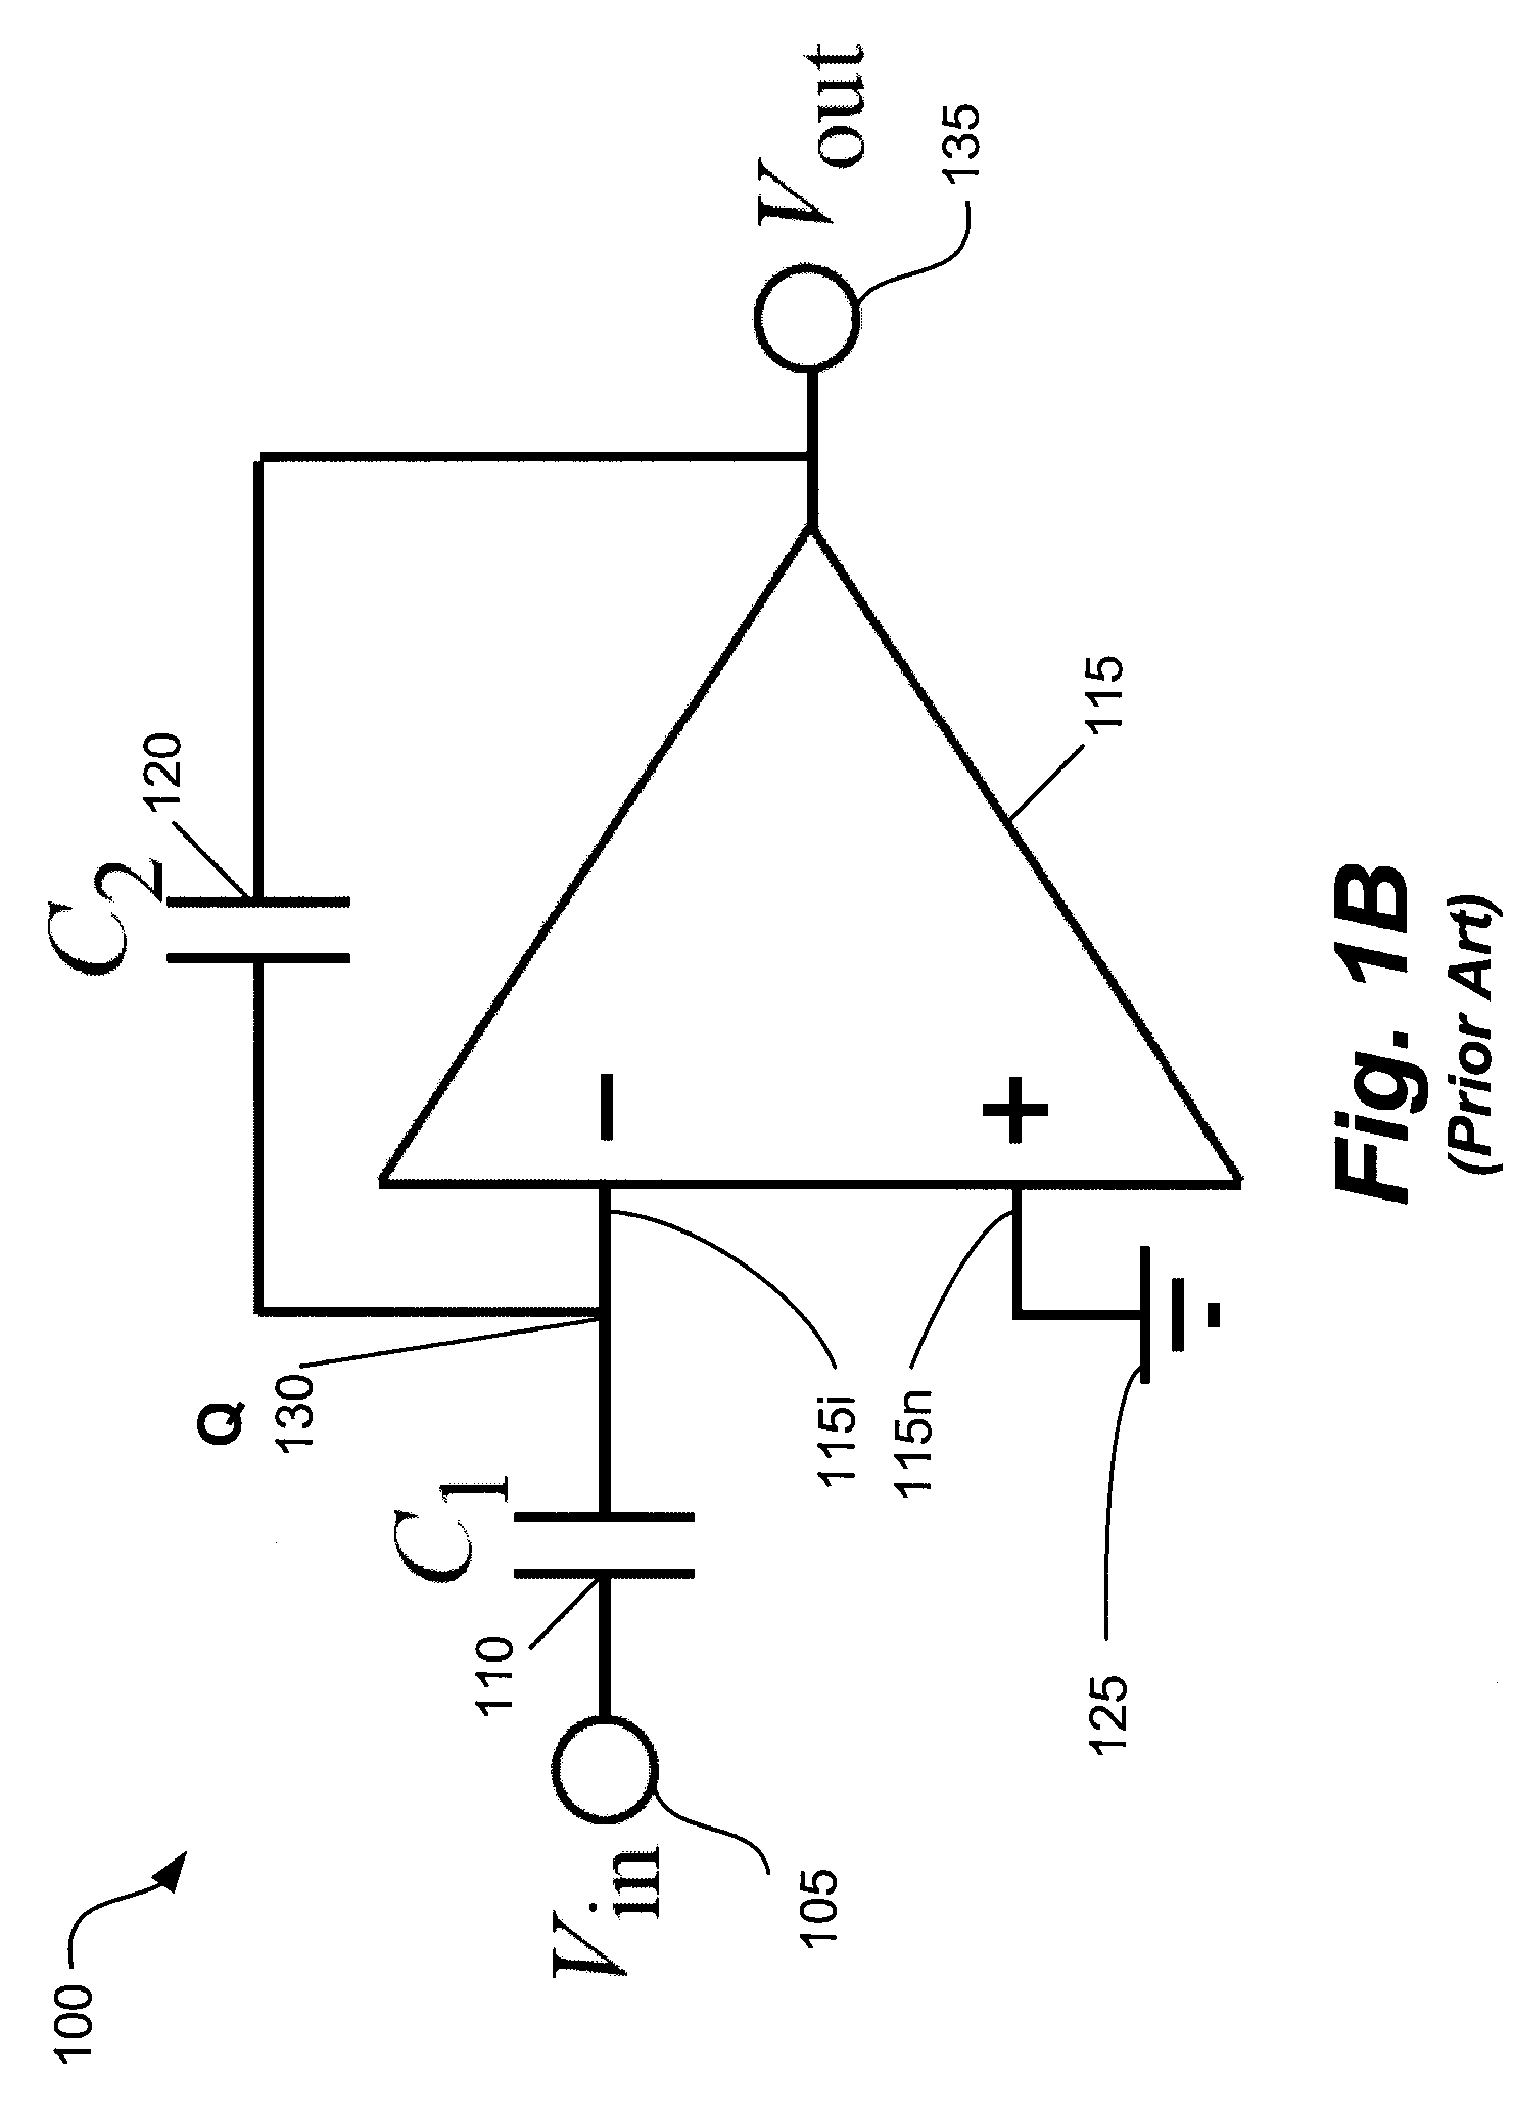 System and method for sensing capacitance change of a capacitive sensor